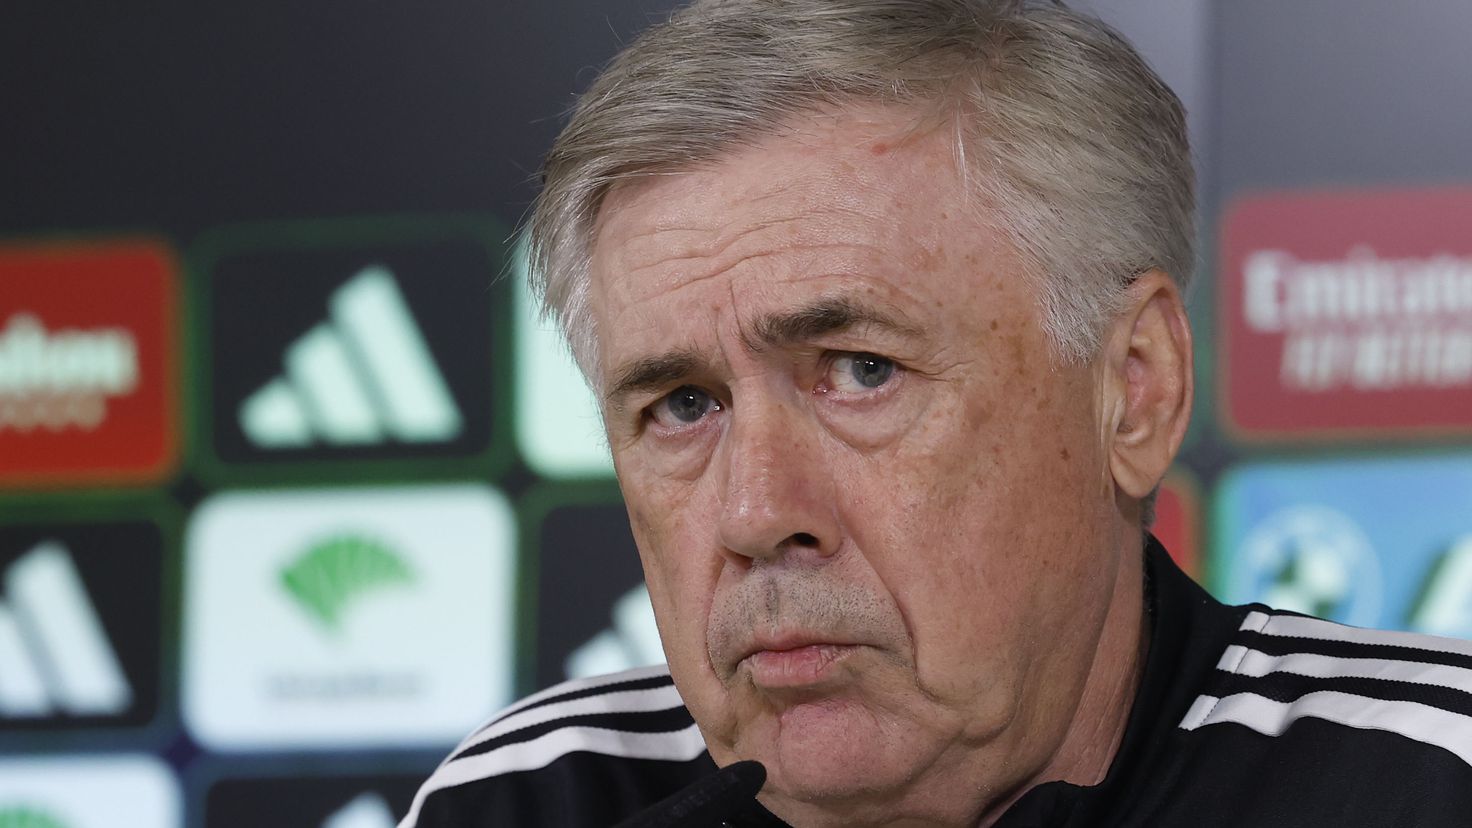 Ancelotti changes the drawing
